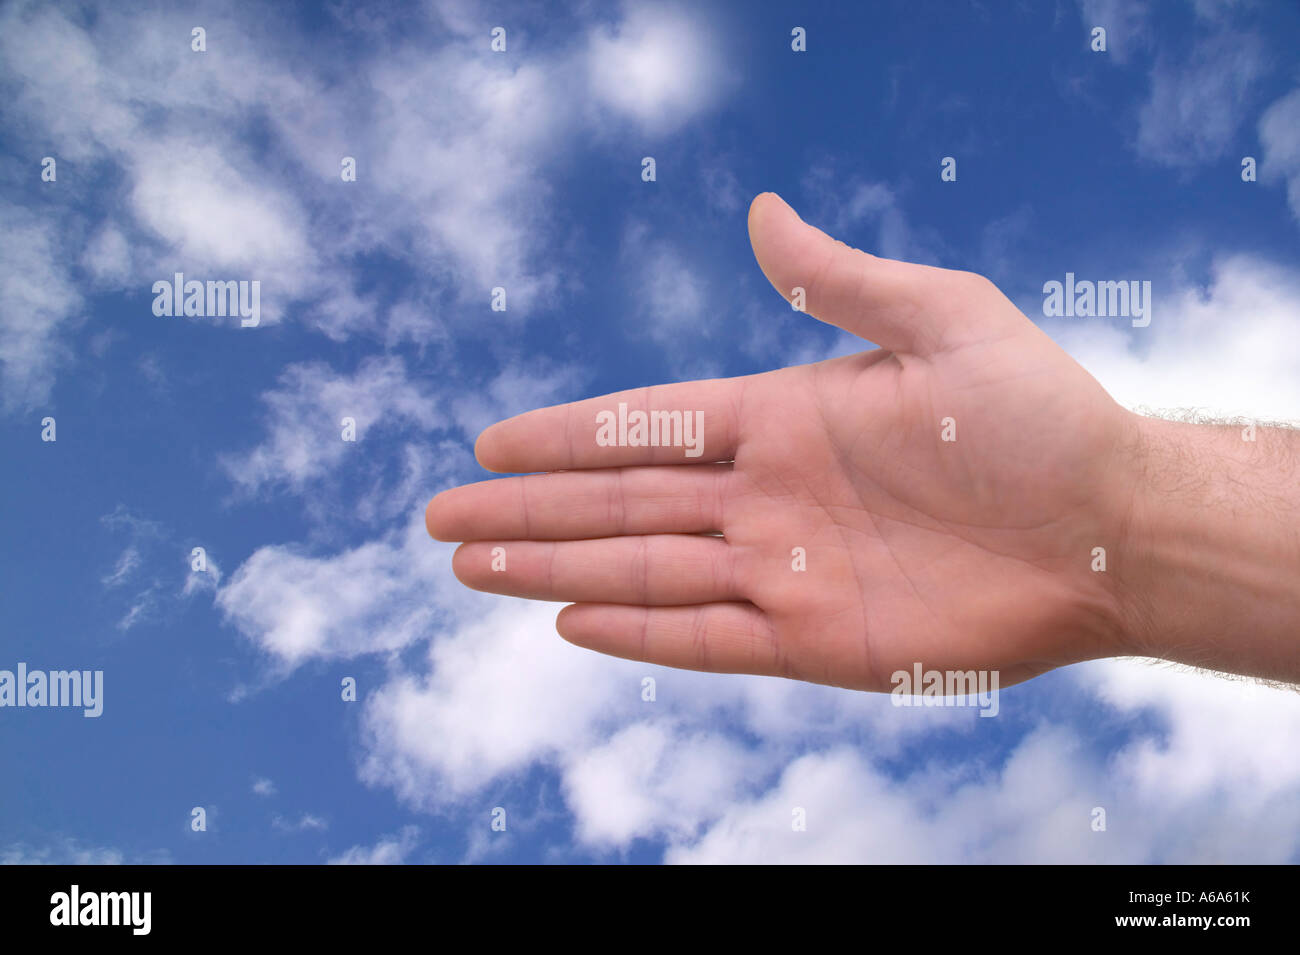 Greeting of a handshake against a blue sky Stock Photo